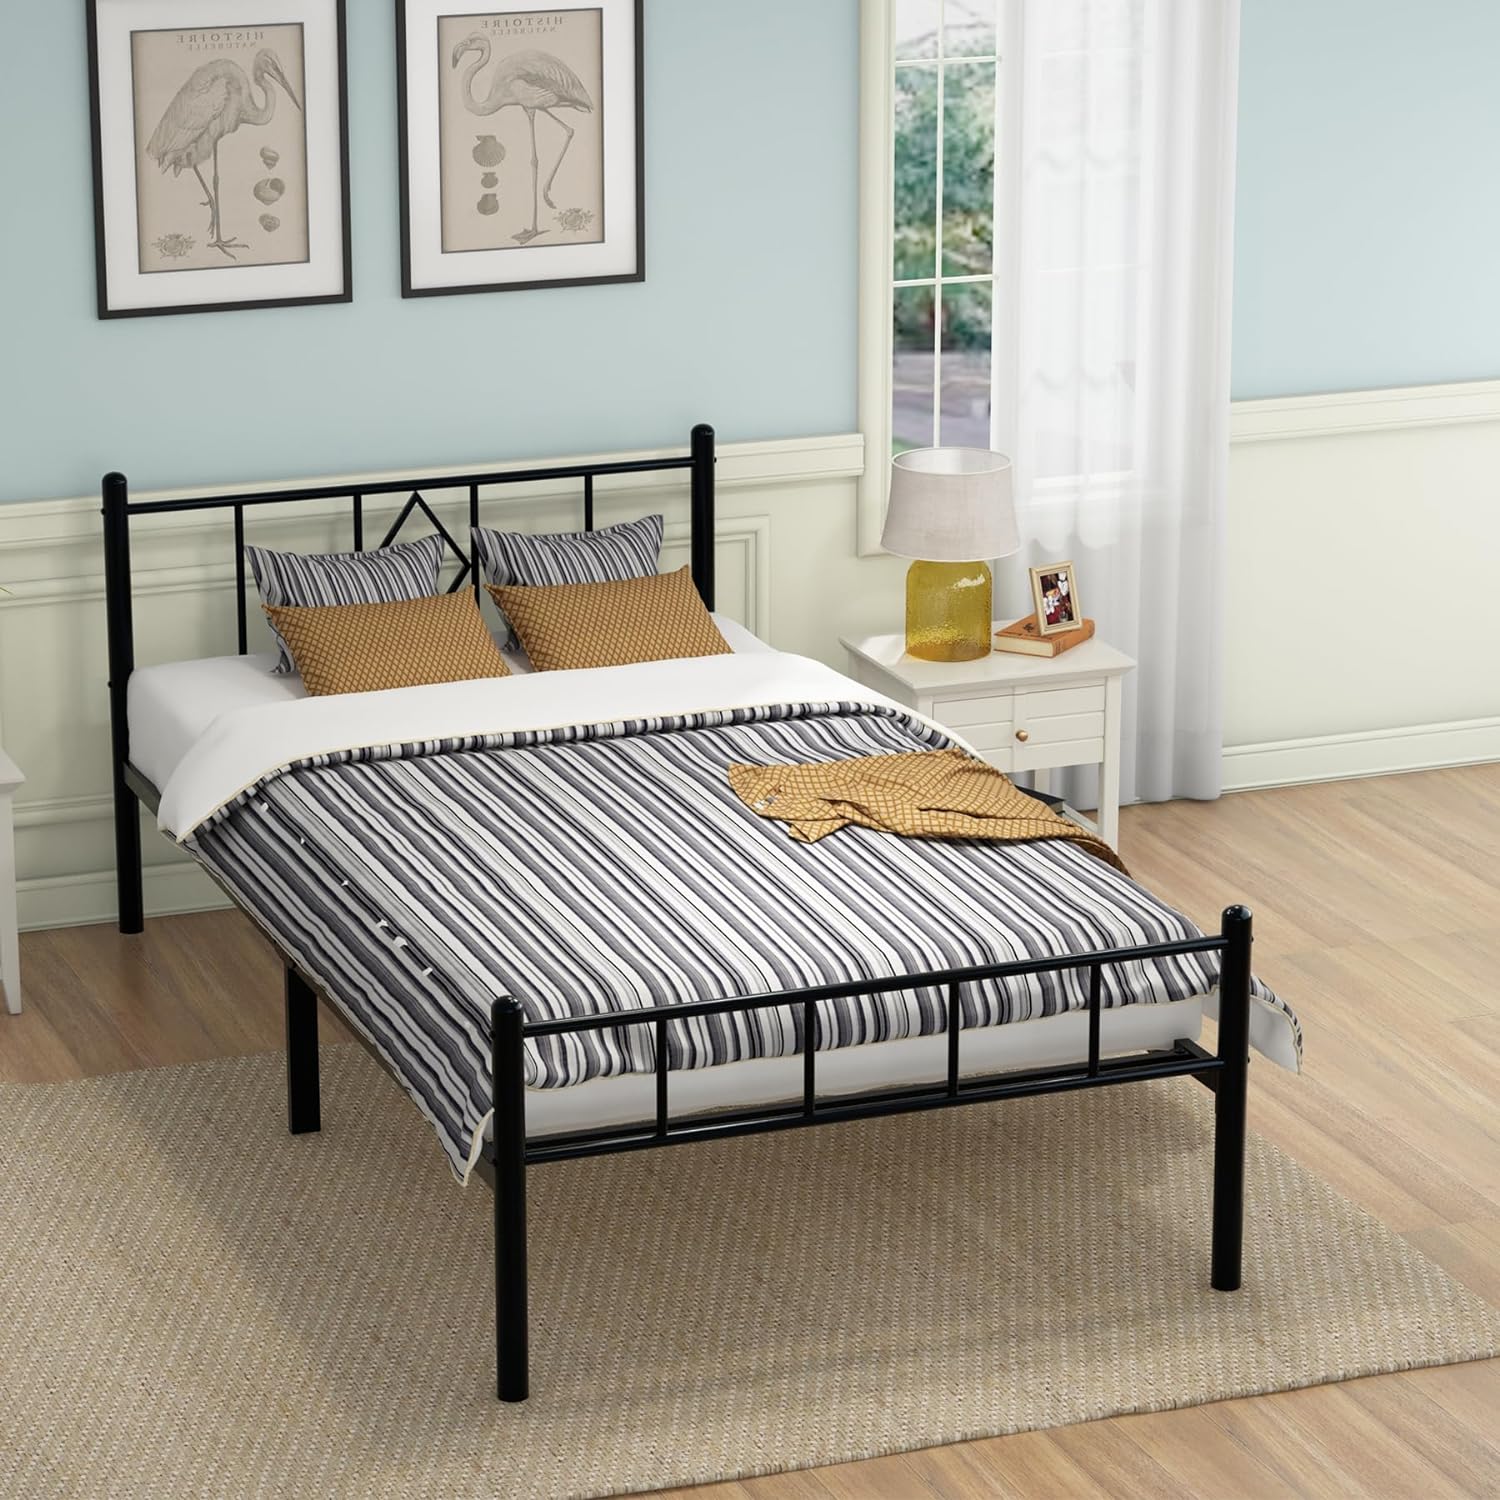 Mavesmog 14 inch Twin Size Bed Frame Metal Platform Mattress Foundation with headboard FootboardNo Box Spring Needed/Under Bed Storage/Easy AssemblyBlack